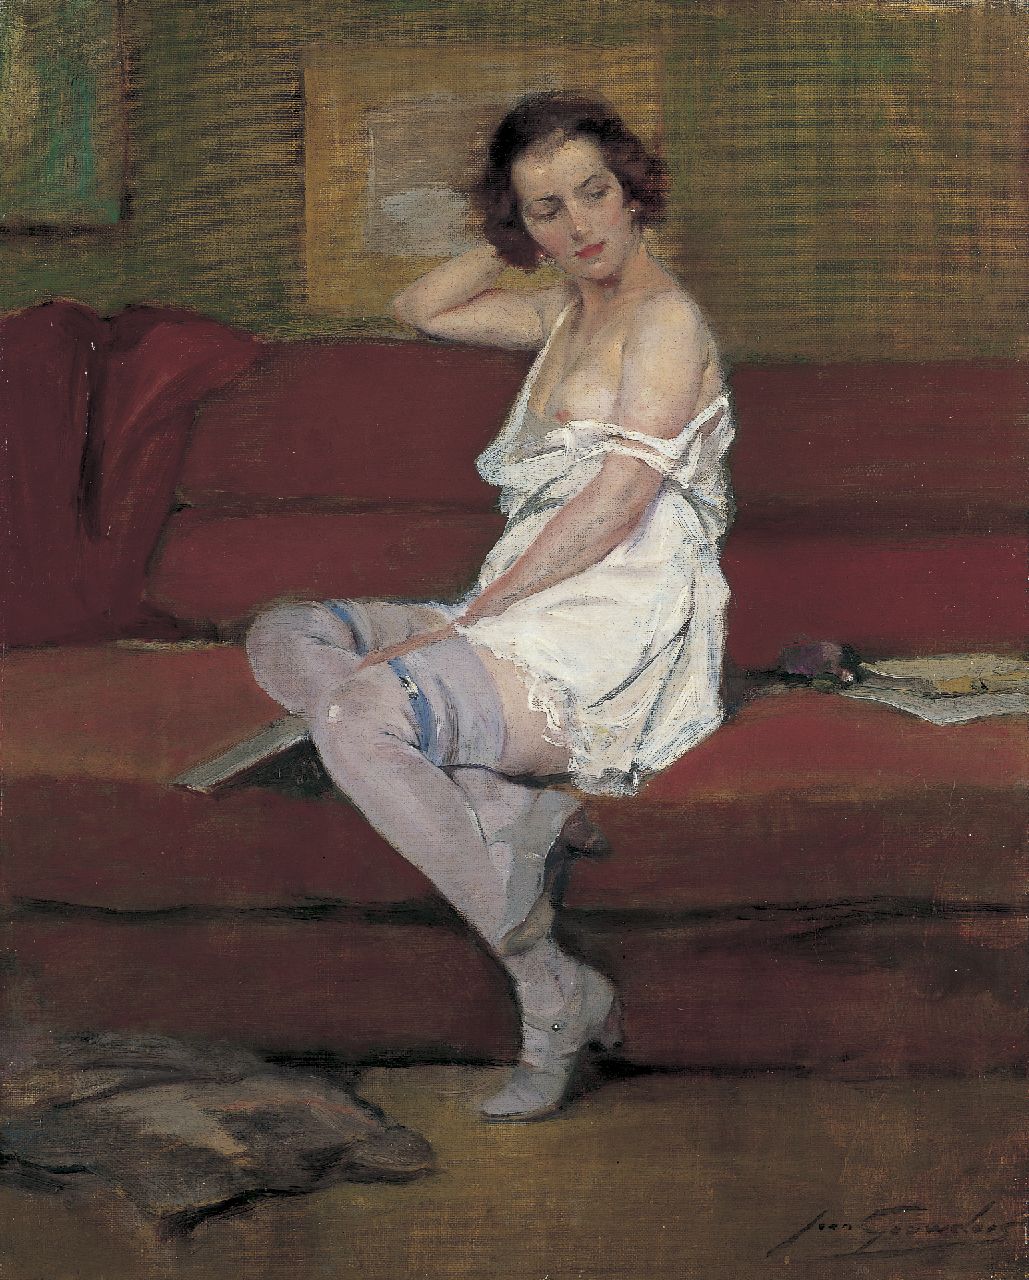 Gouweloos J.L.H.  | 'Jean' Léon Henri Gouweloos, A Lady on a Couch, oil on canvas 50.0 x 40.1 cm, signed l.r.